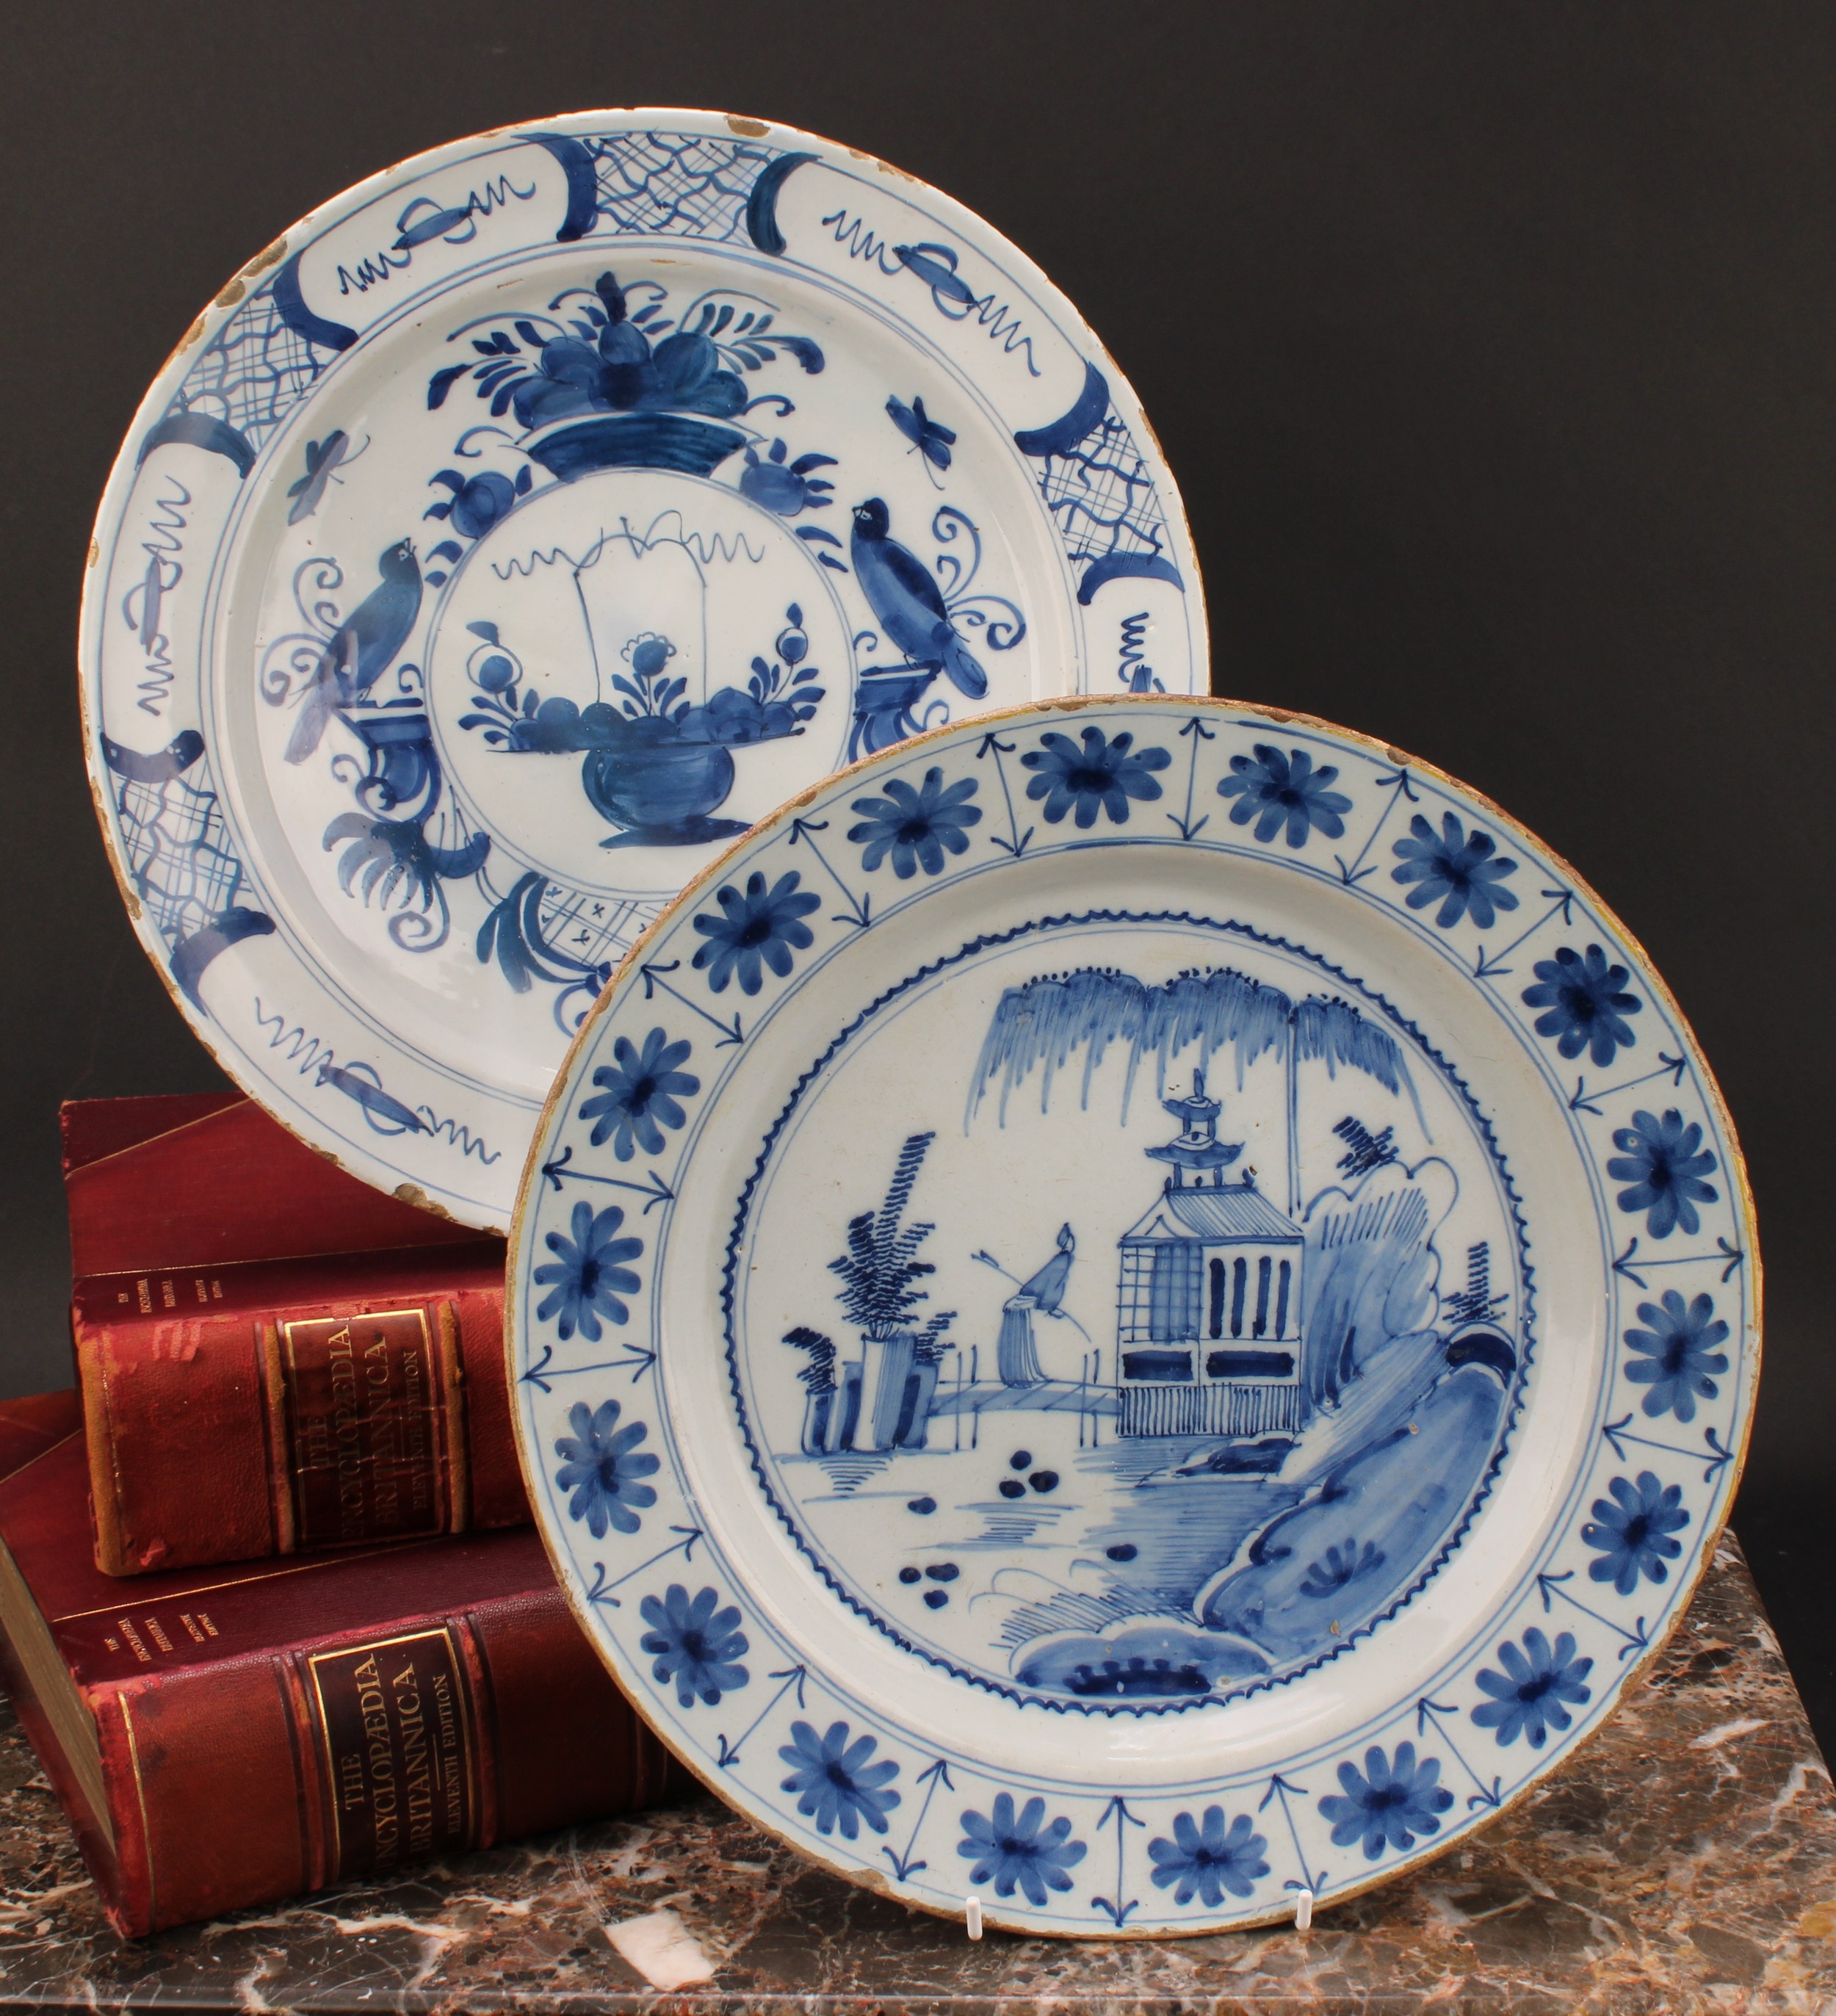 An 18th century Delft circular charger, painted in underglaze blue in the Chinese taste, with